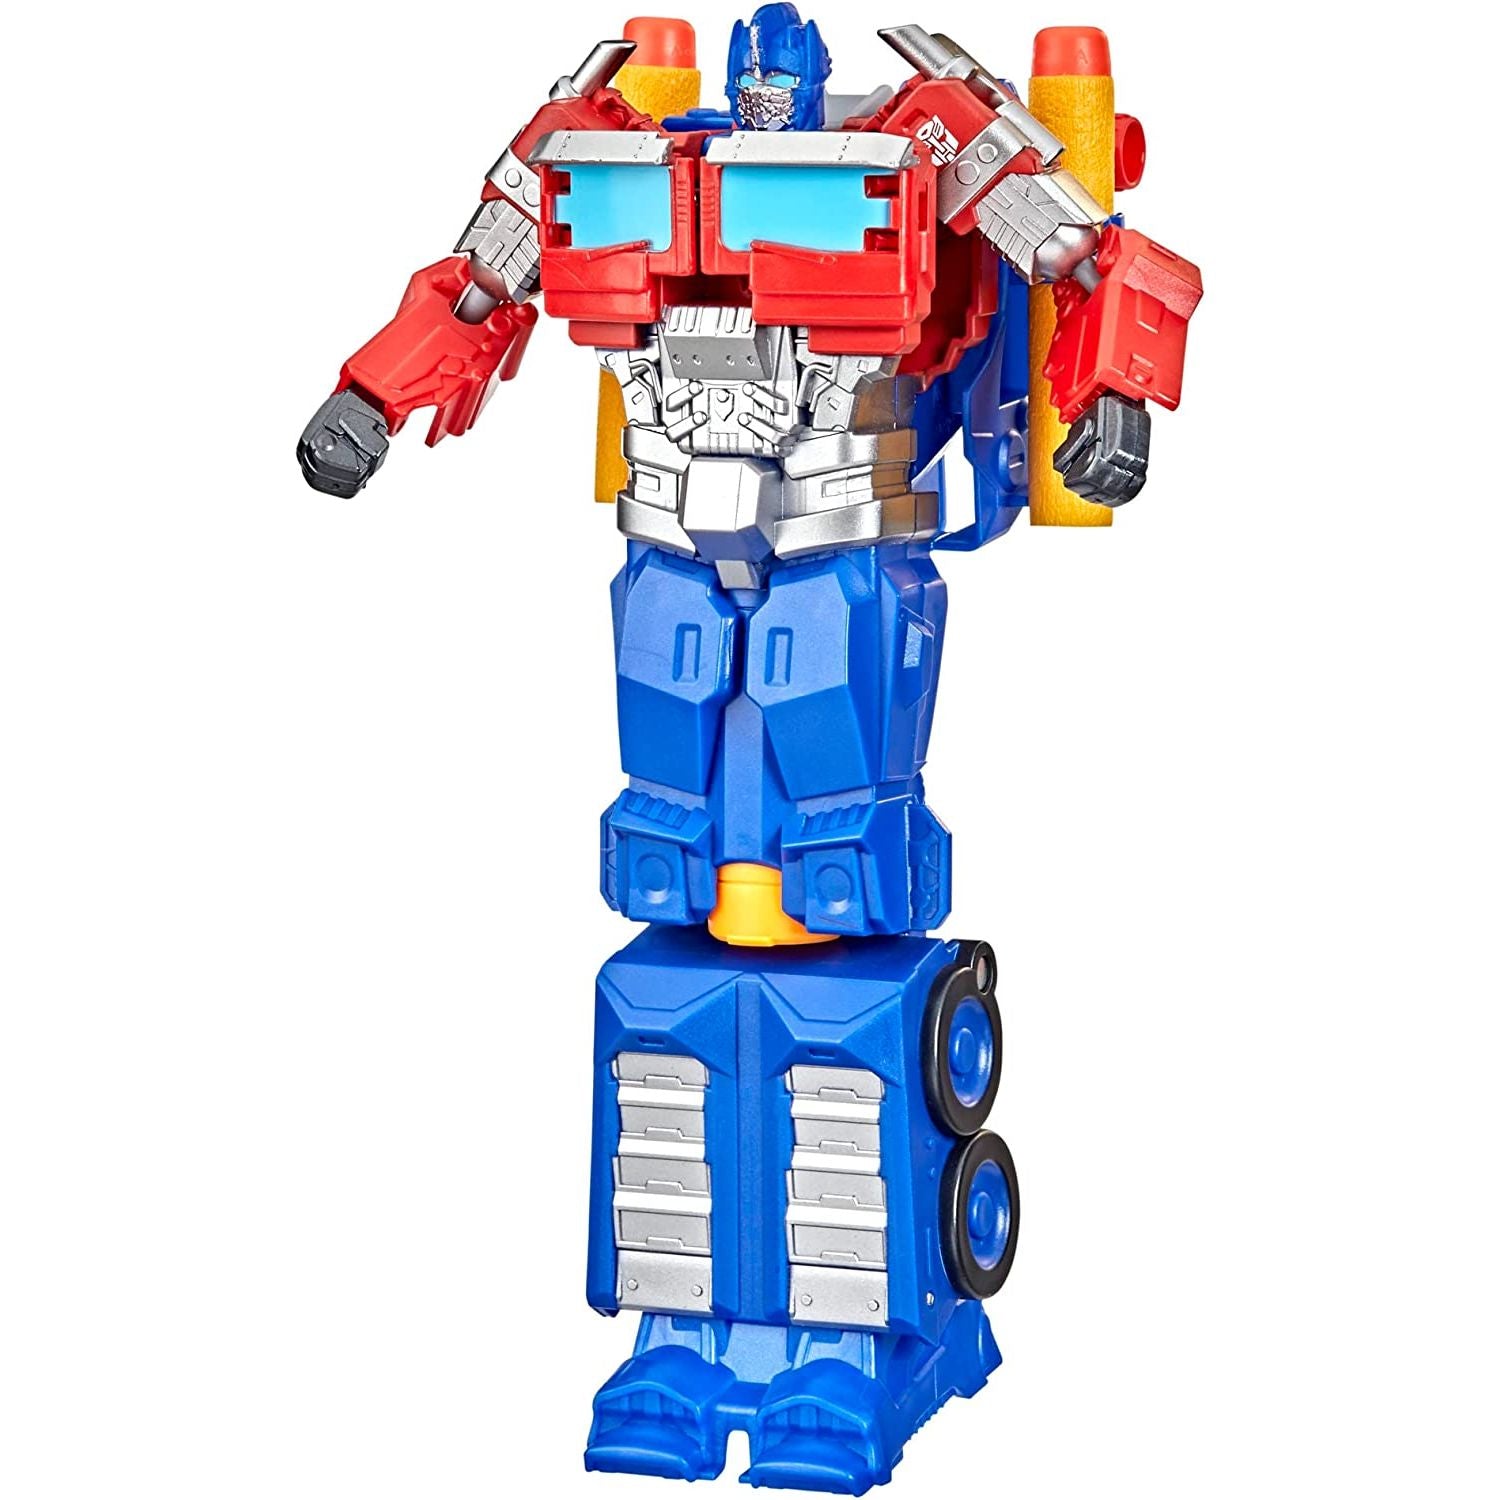 Transformers Toys Rise of The Beasts Movie 2-in-1 Optimus Prime Blaster Powered by Nerf for Ages 6 and Up, 7-inch